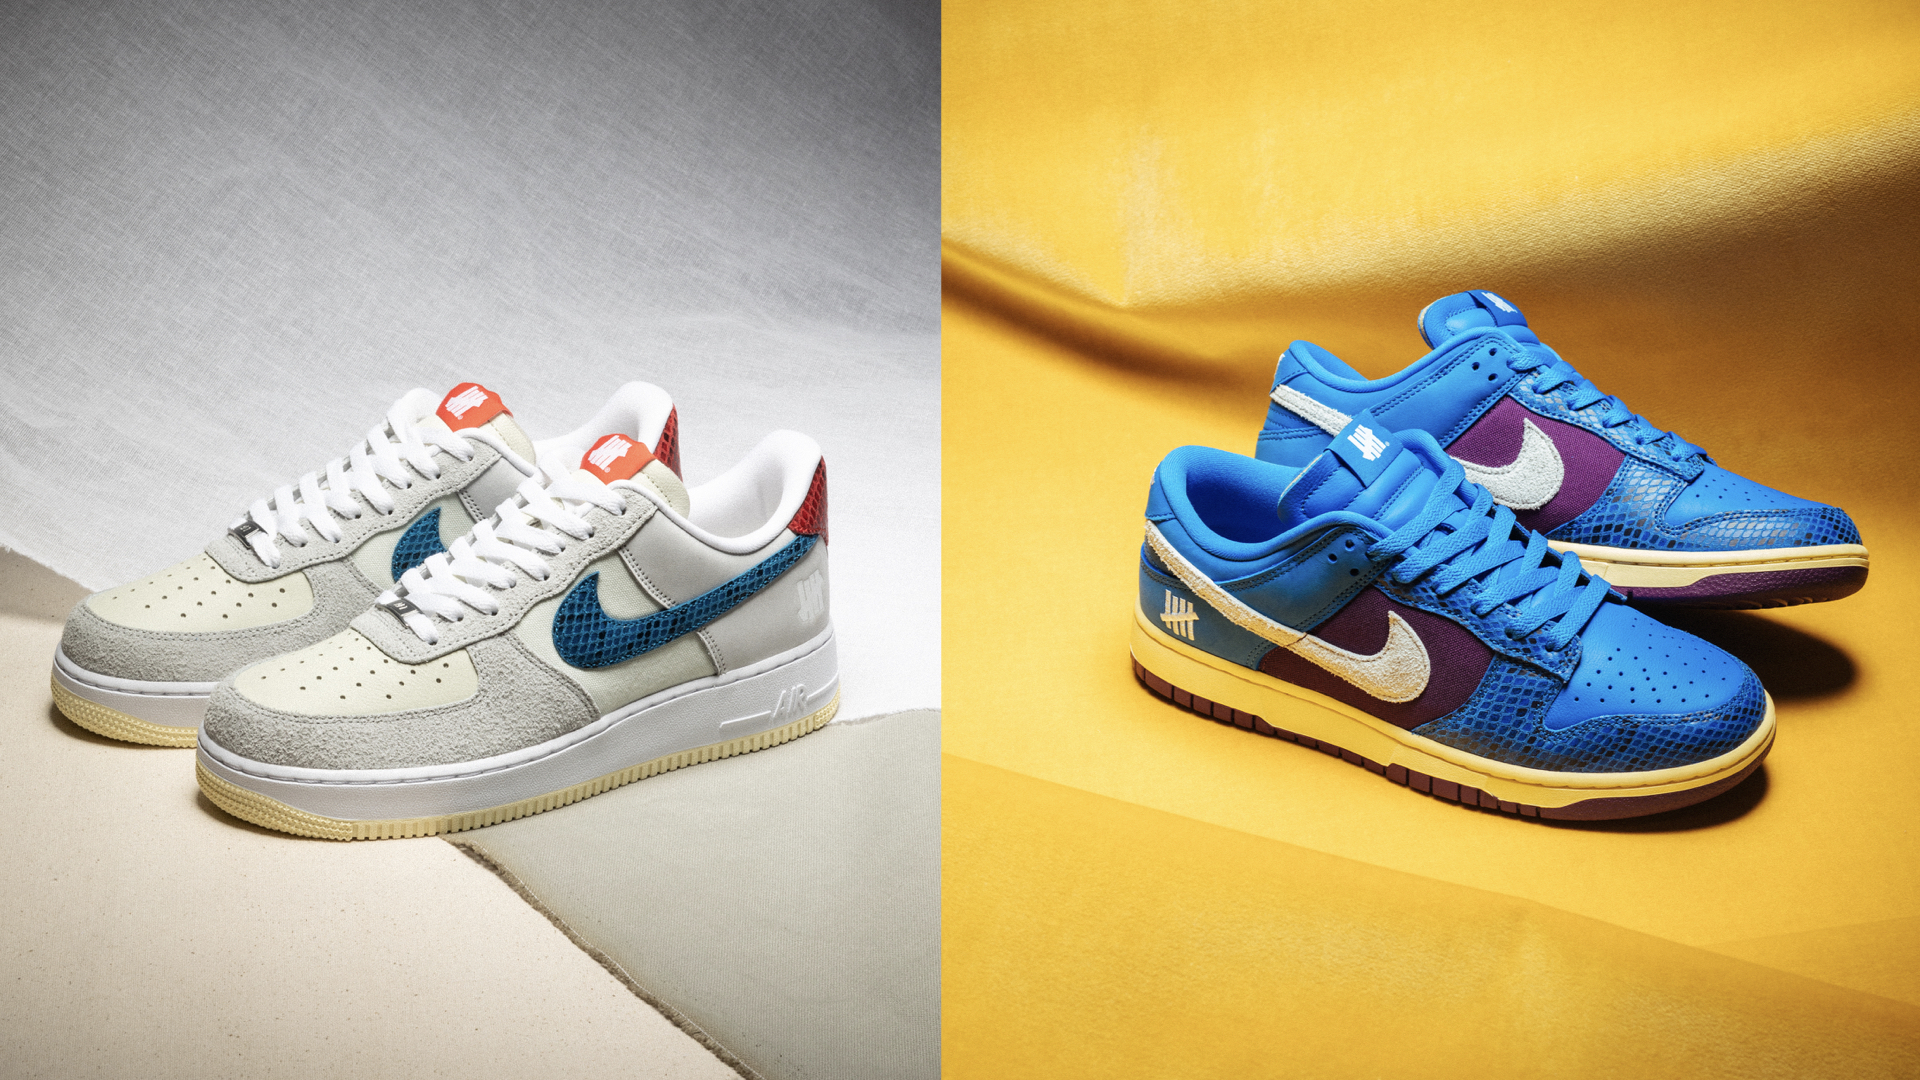 UNDEFEATED x NIKE DUNK VS AF1「5 ON IT」系列即將推出